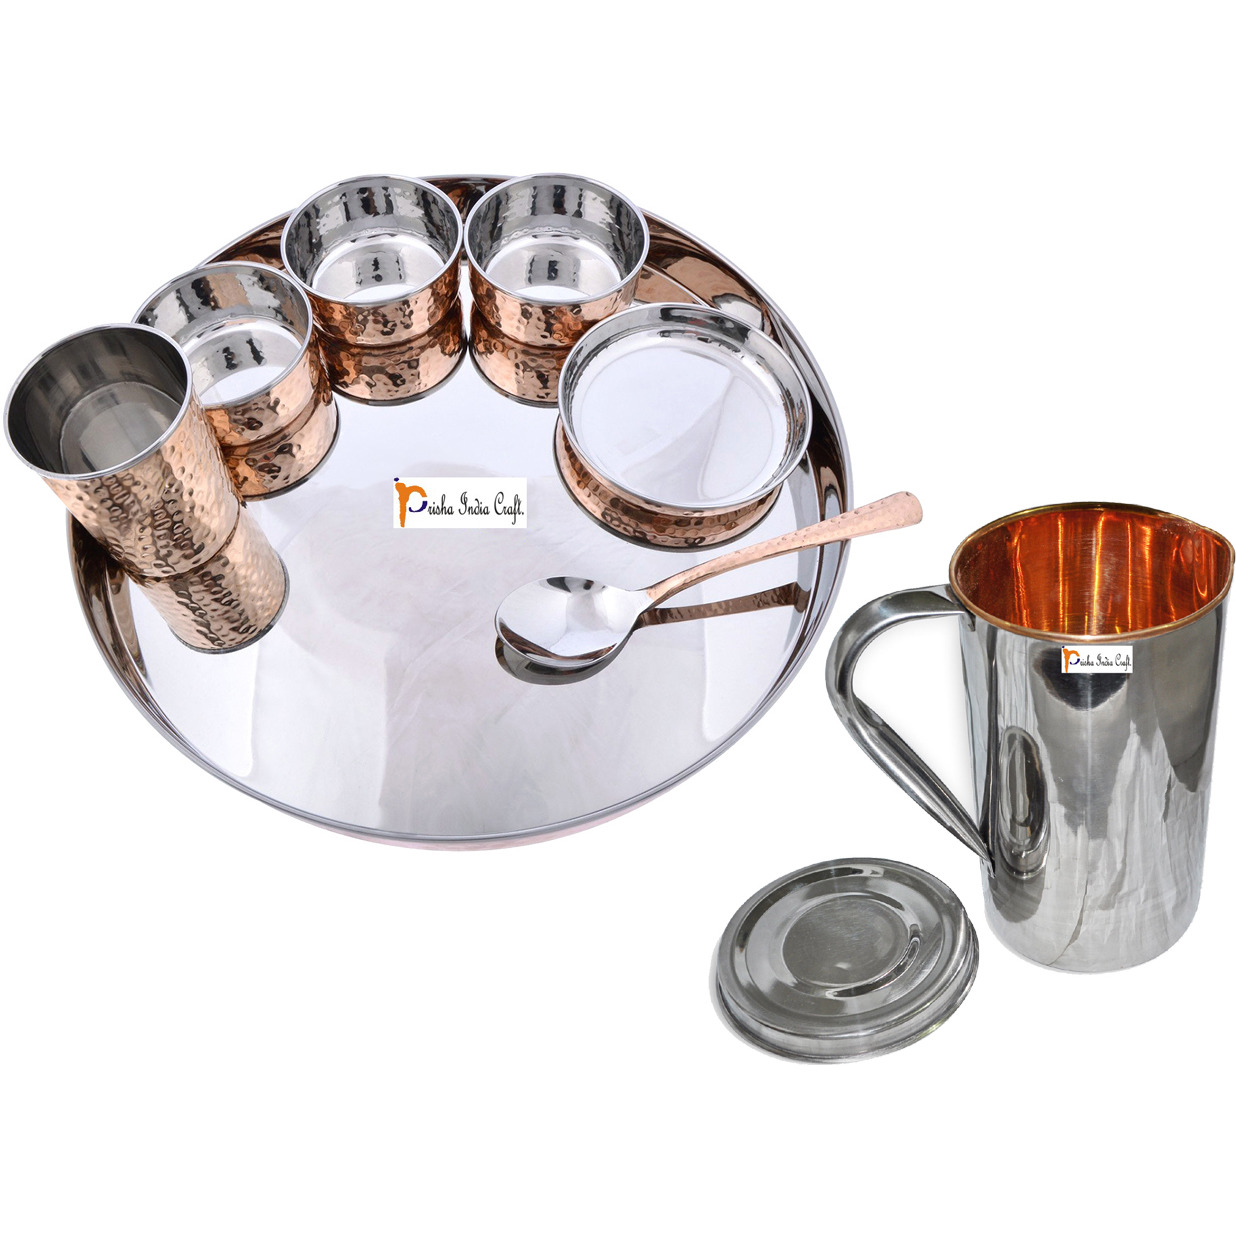 Prisha India Craft B. Dinnerware Traditional Stainless Steel Copper Dinner Set of Thali Plate, Bowls, Glass and Spoon, Dia 13  With 1 Stainless Steel Copper Pitcher Jug - Christmas Gift